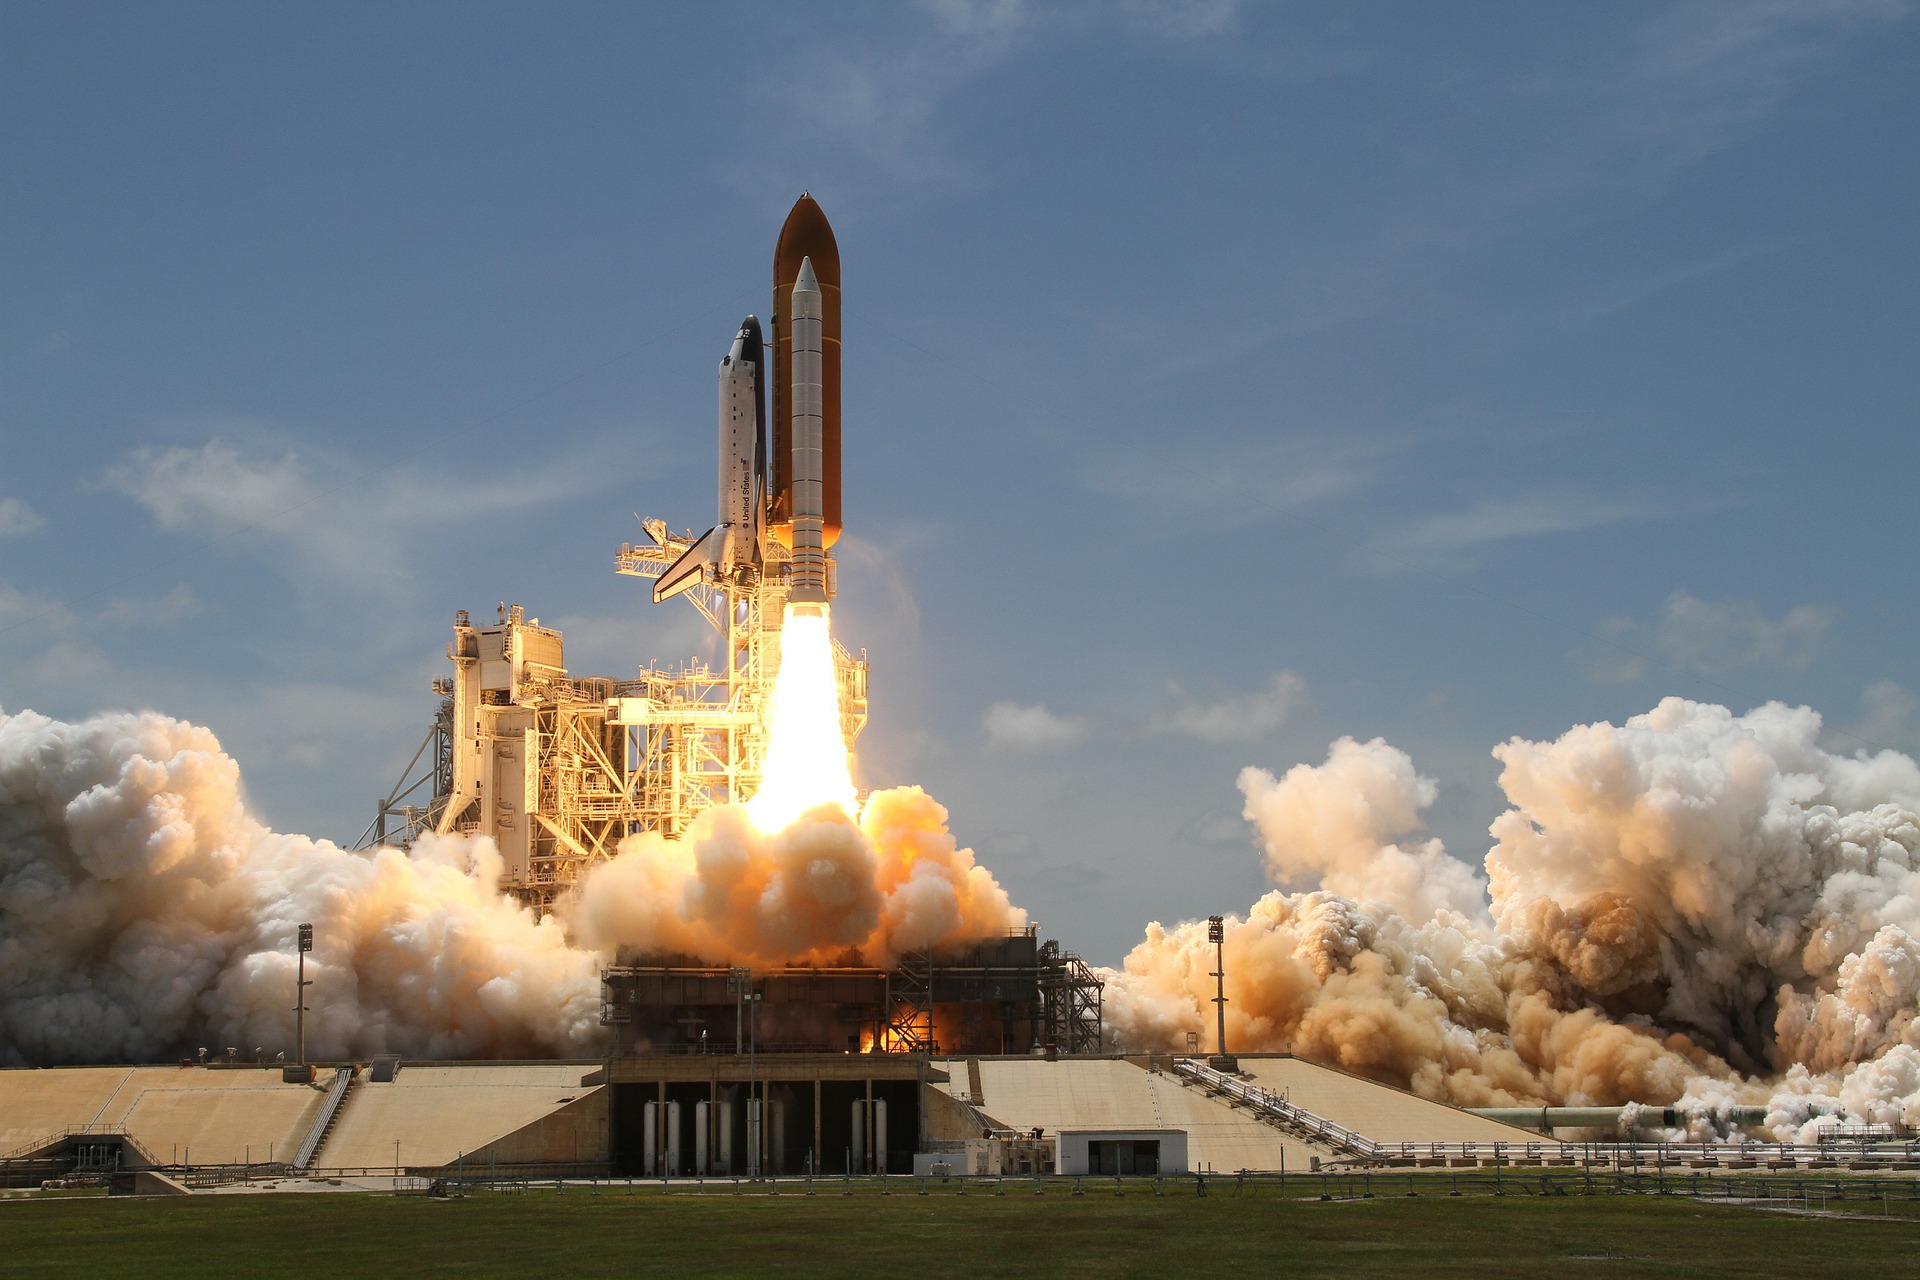 5 Interesting Stories & Quotes from “Think Like a Rocket Scientist”